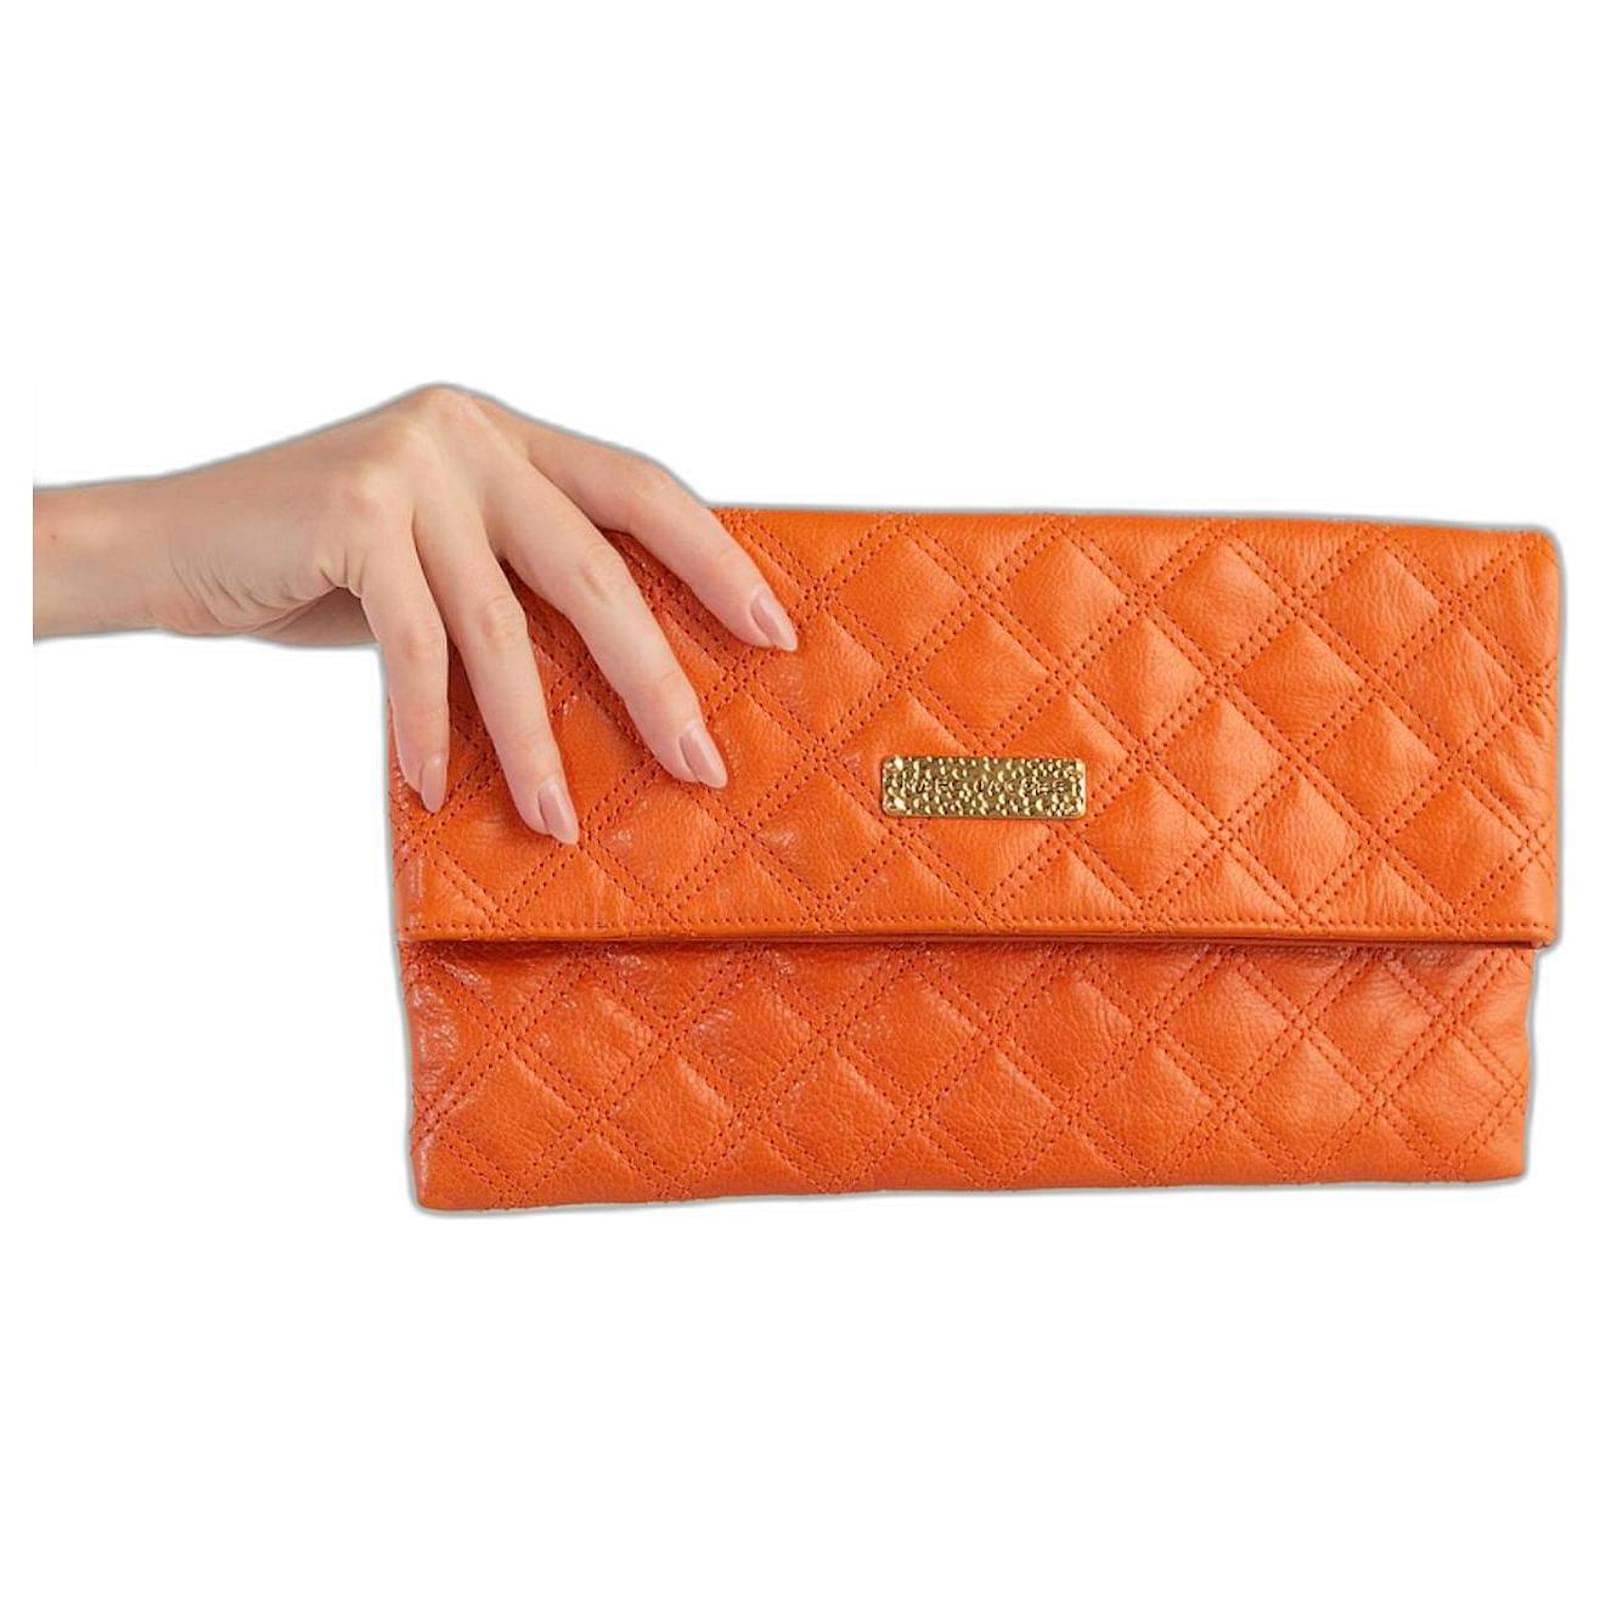 Marc Jacobs Clutch at